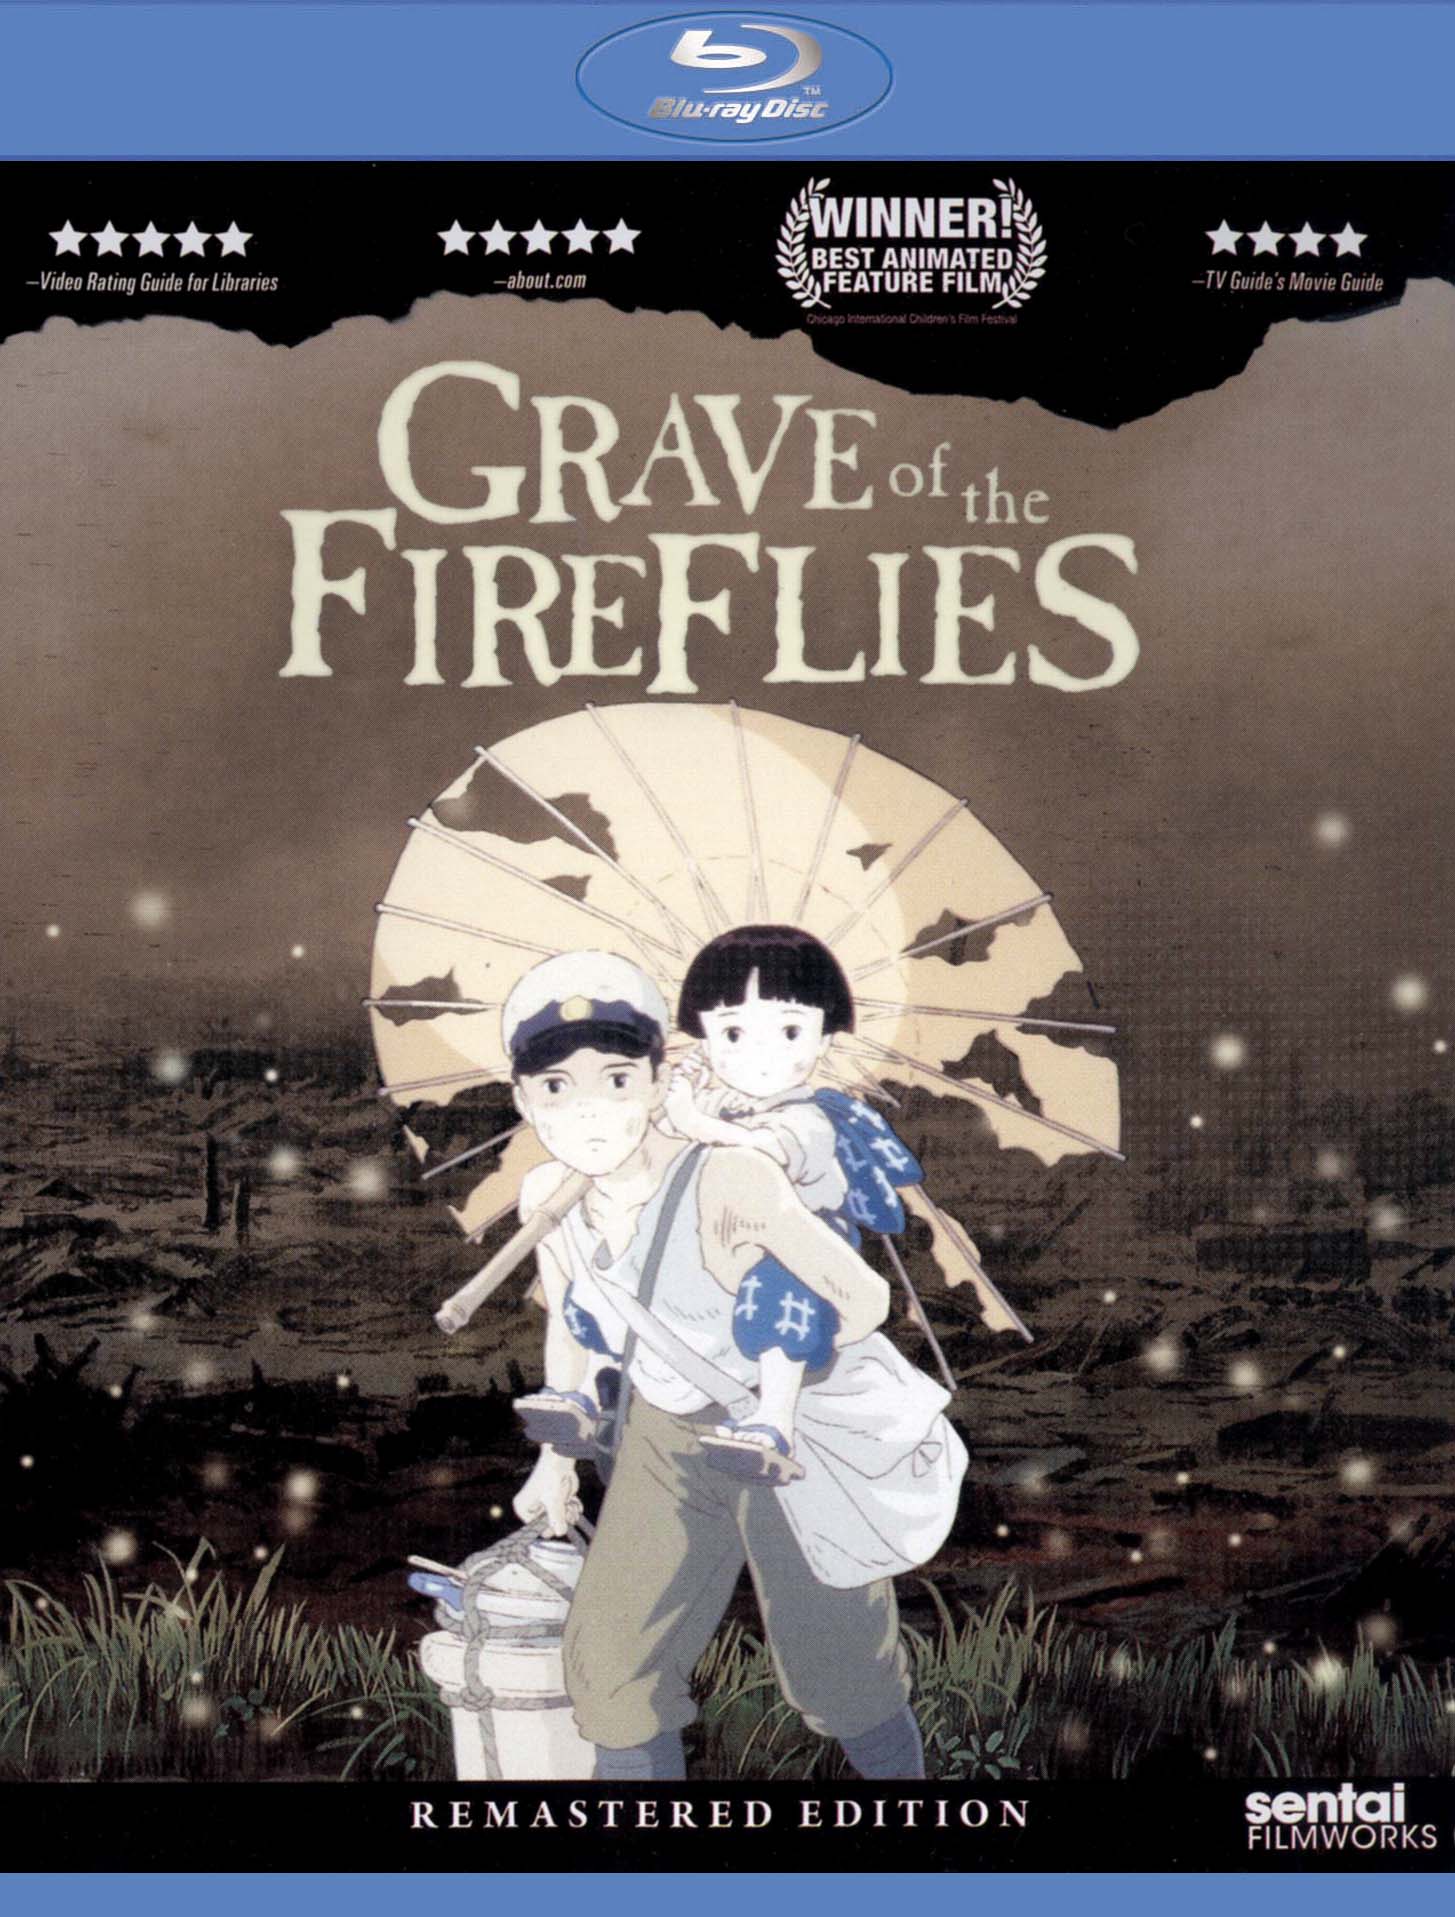 Grave of the Fireflies: 9781562197292 - AbeBooks